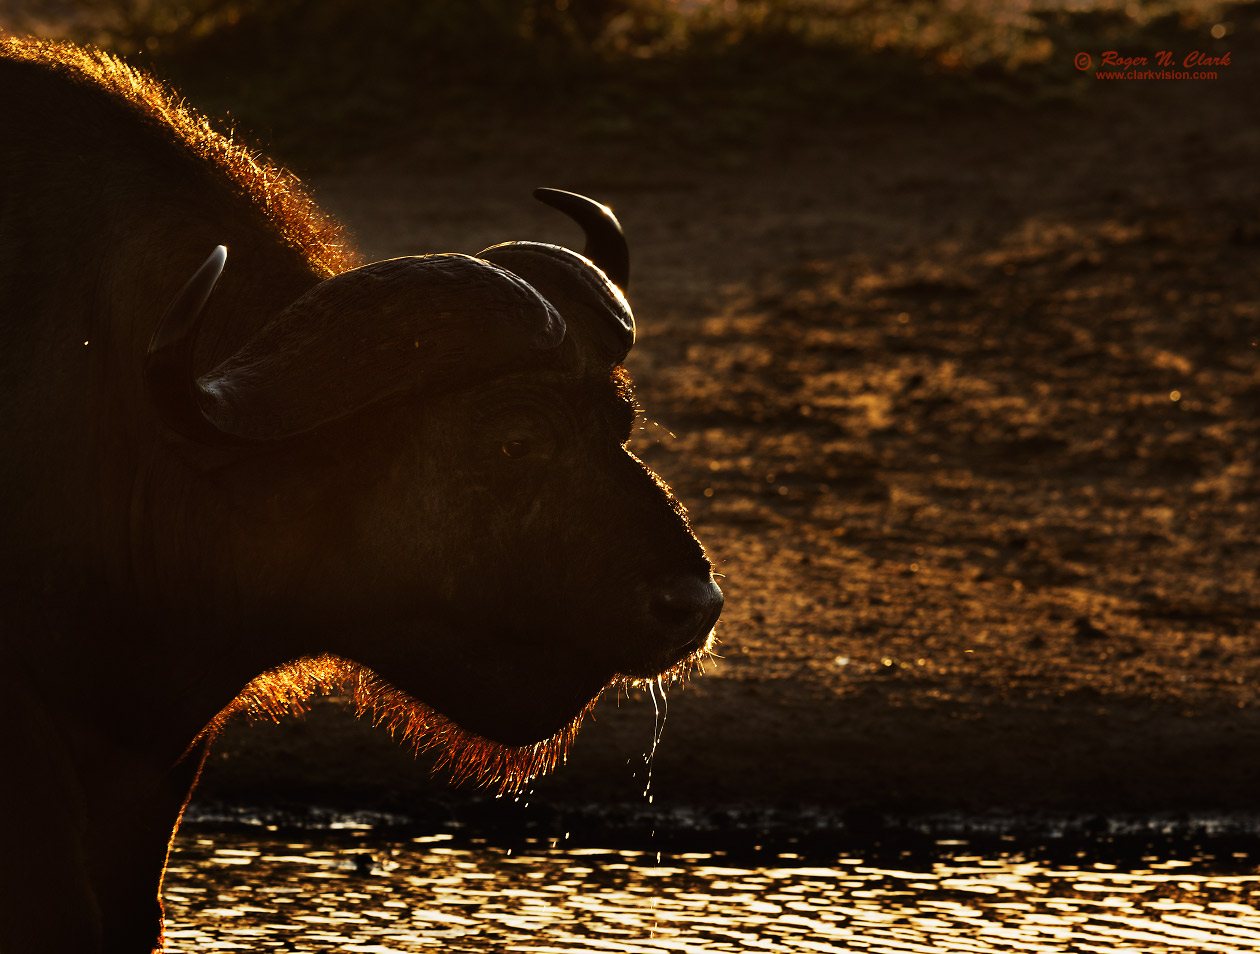 image cape.buffalo.c02.20.2015.0J6A4411_d-1260s.jpg is Copyrighted by Roger N. Clark, www.clarkvision.com